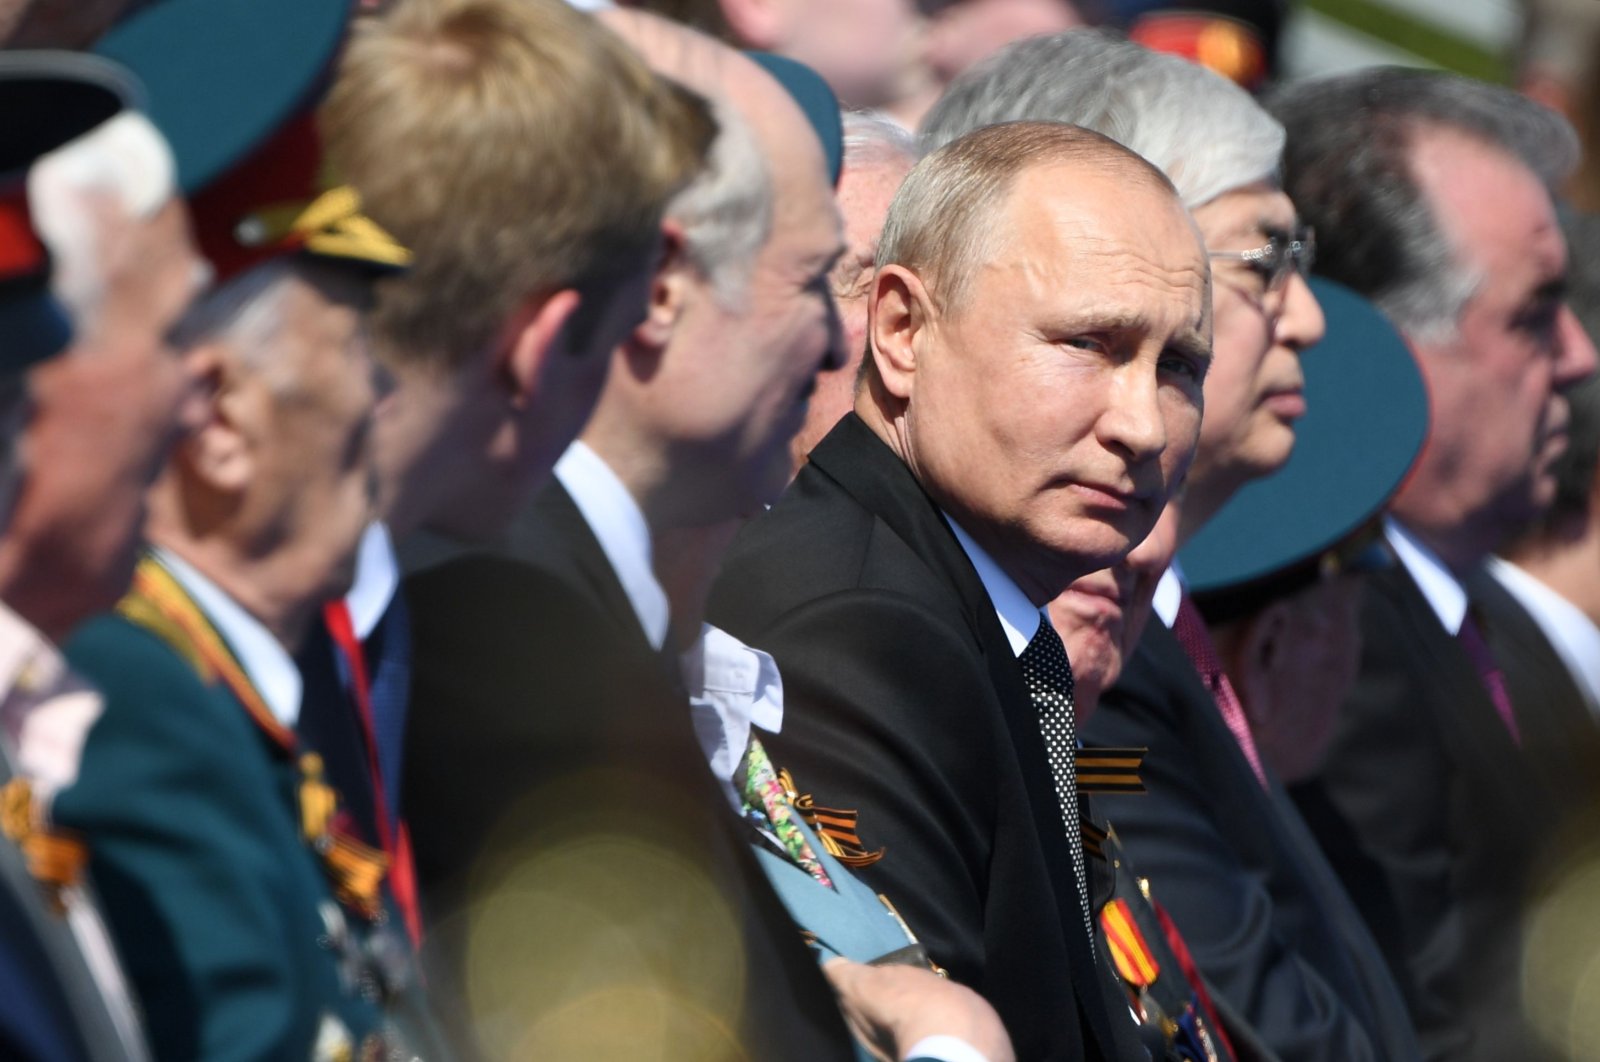 Russian President Vladimir Putin prior to a military parade, which marks the 75th anniversary of the Soviet victory over Nazi Germany in World War II, at Red Square in Moscow, June 24, 2020. (AFP Photo)